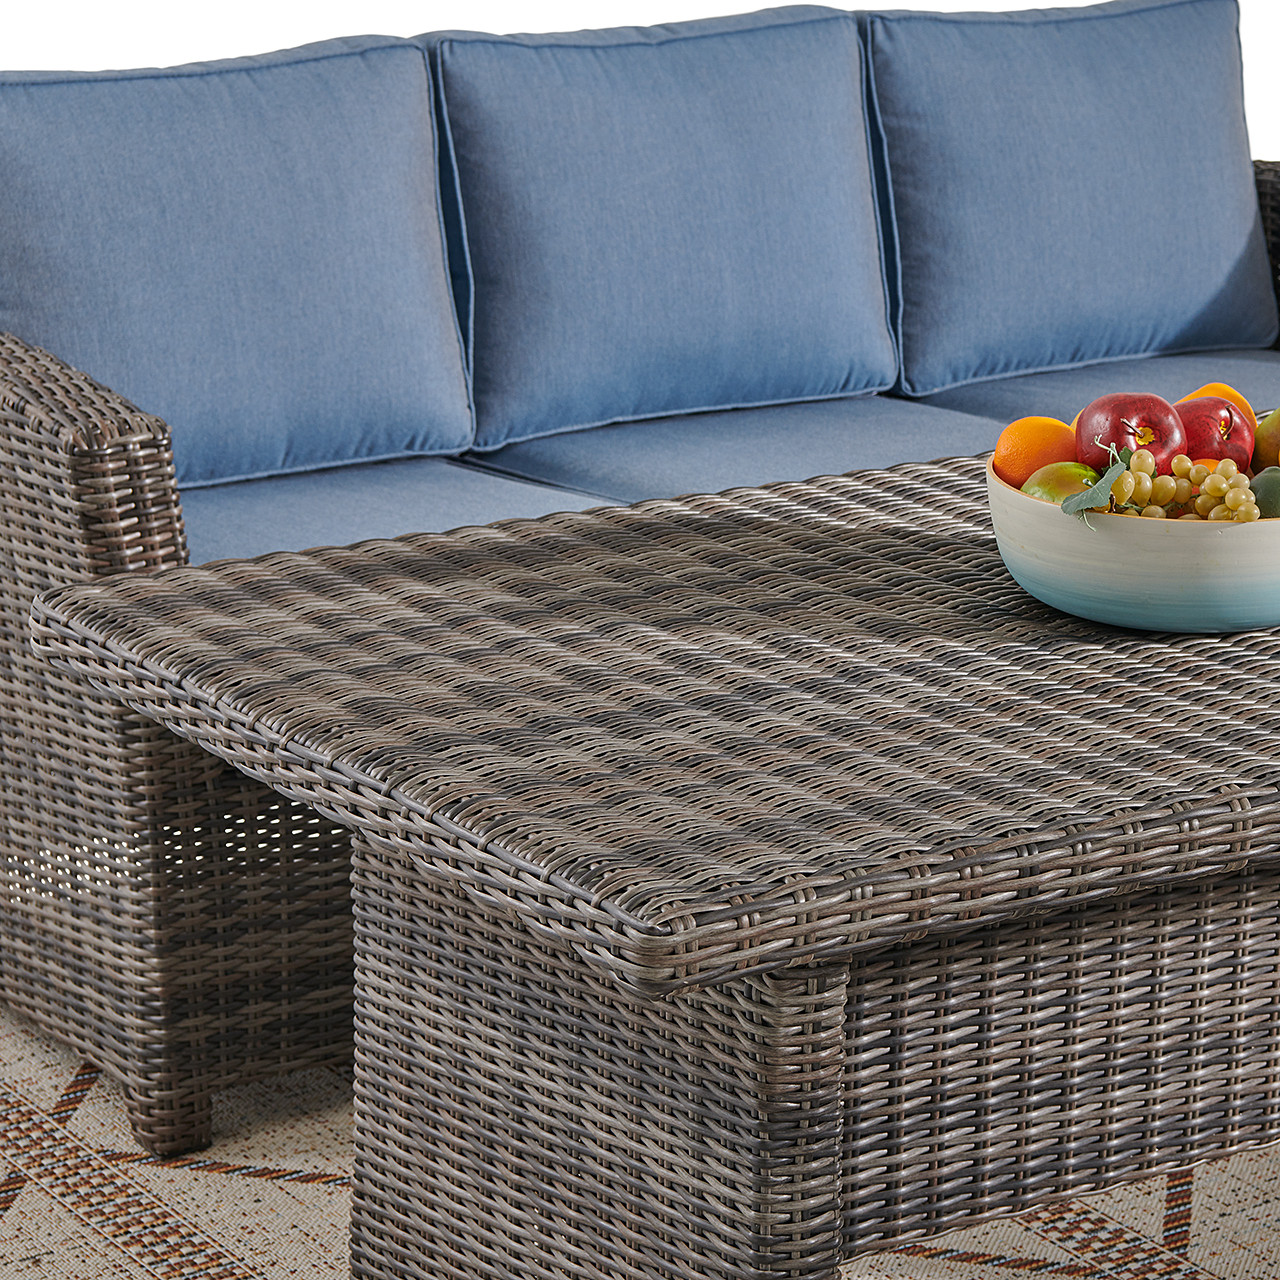 Venice Silver Oak Outdoor Wicker with Cushions 6 Piece Swivel Sofa Group + 59 x 32 in. Woven Top Lounge Table